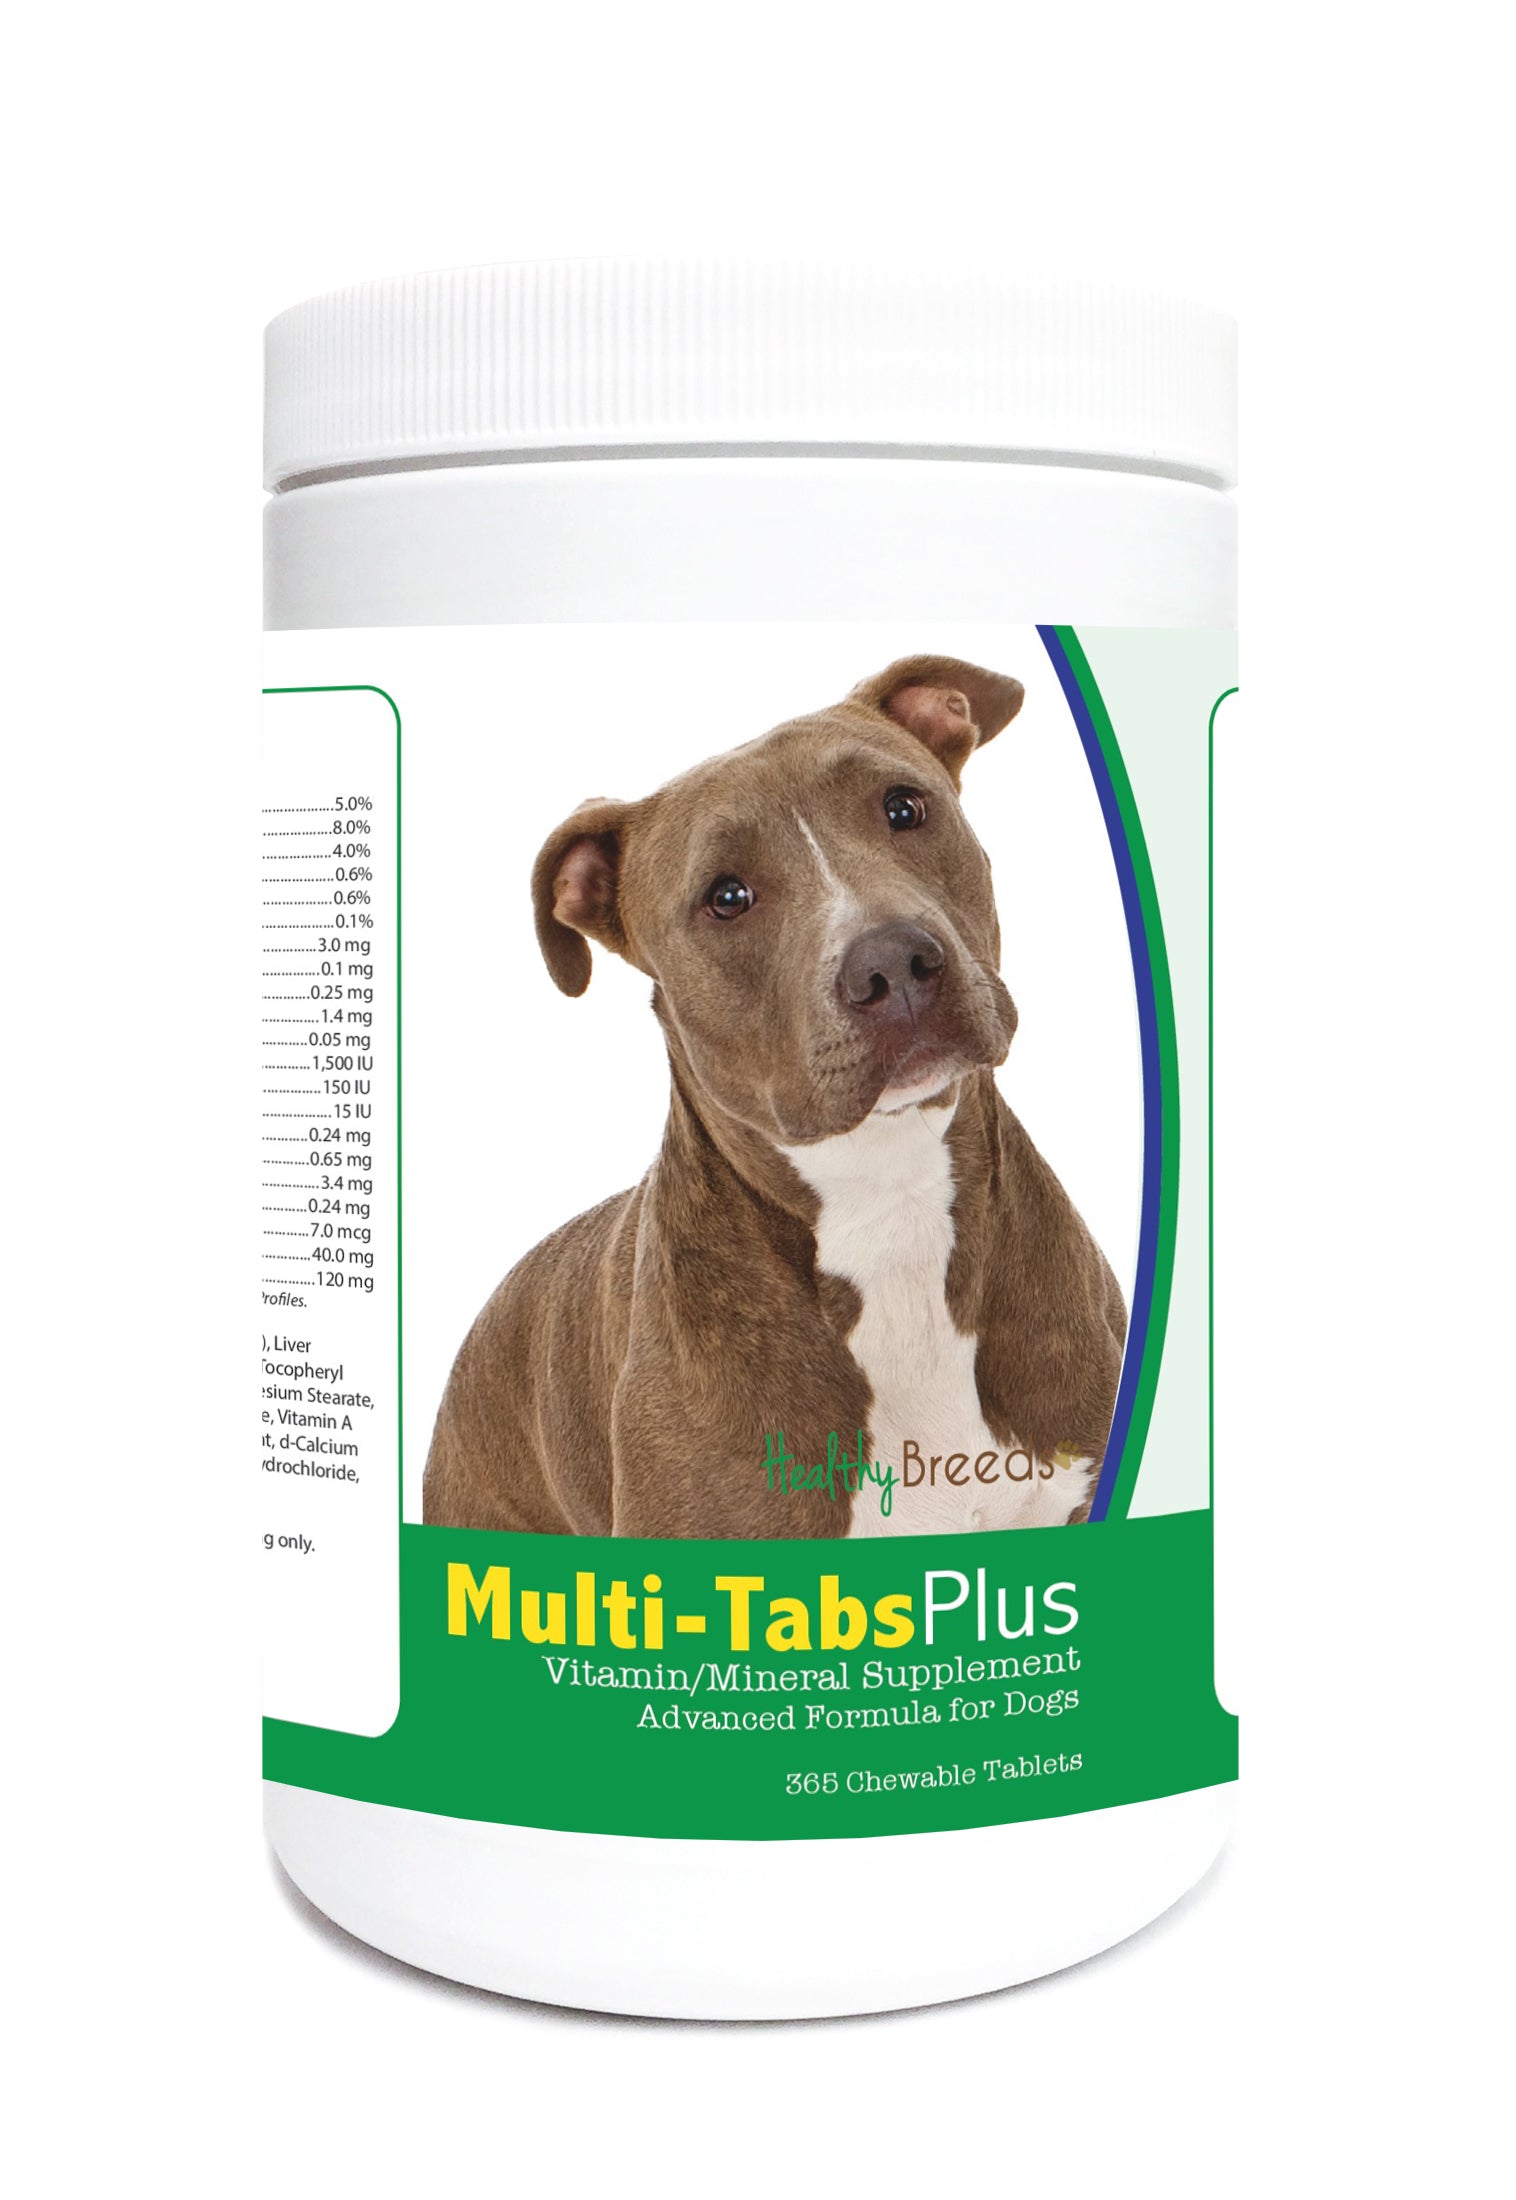 Pit Bull Multi-Tabs Plus Chewable Tablets 365 Count